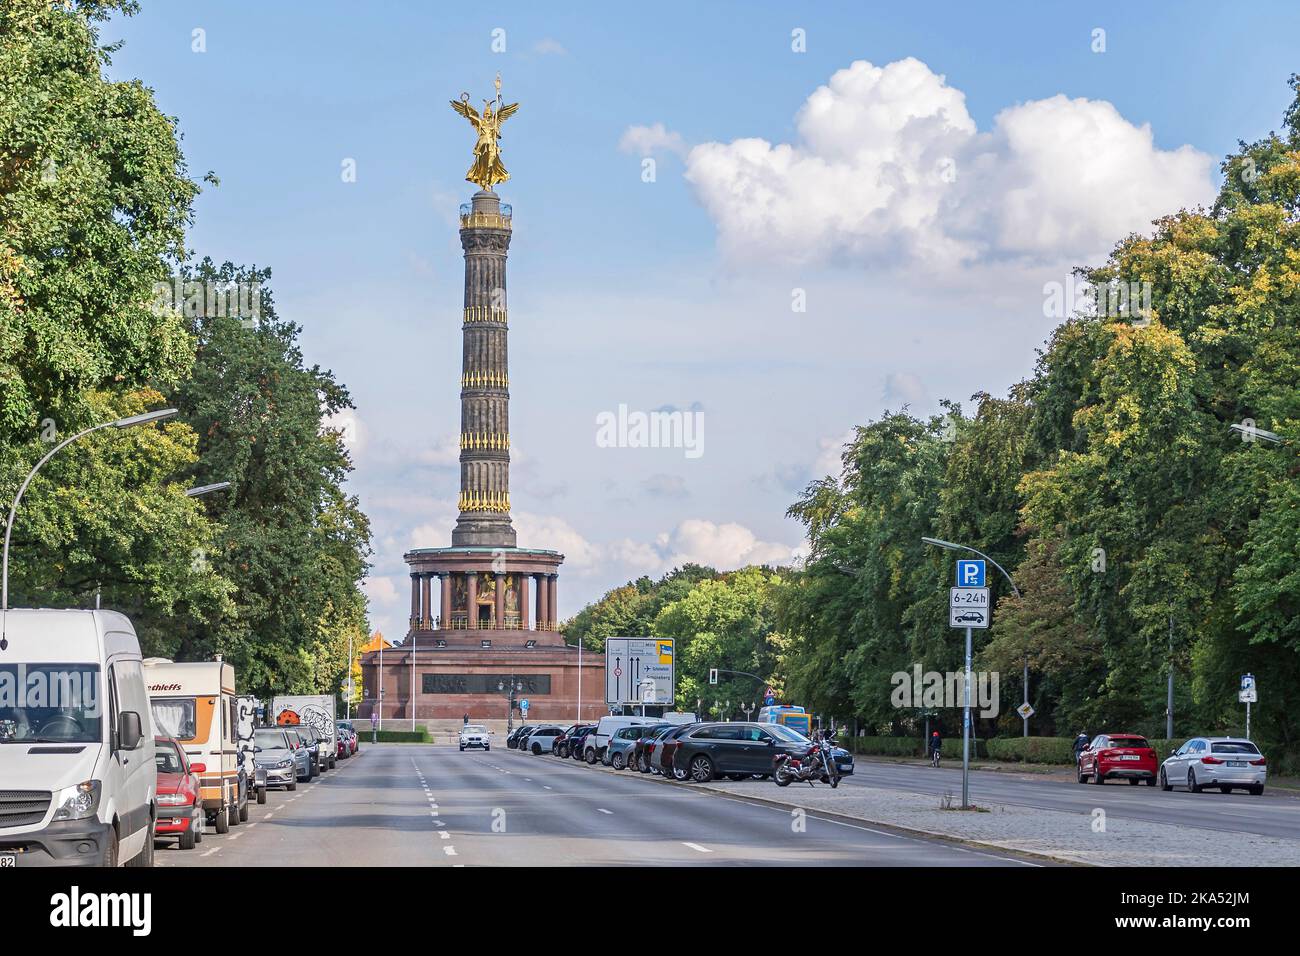 Berlin, Germany - September 30, 2022: The Strasse des 17. Juni with the Victory Column, its viewing platform, a base of polished red granite and canno Stock Photo